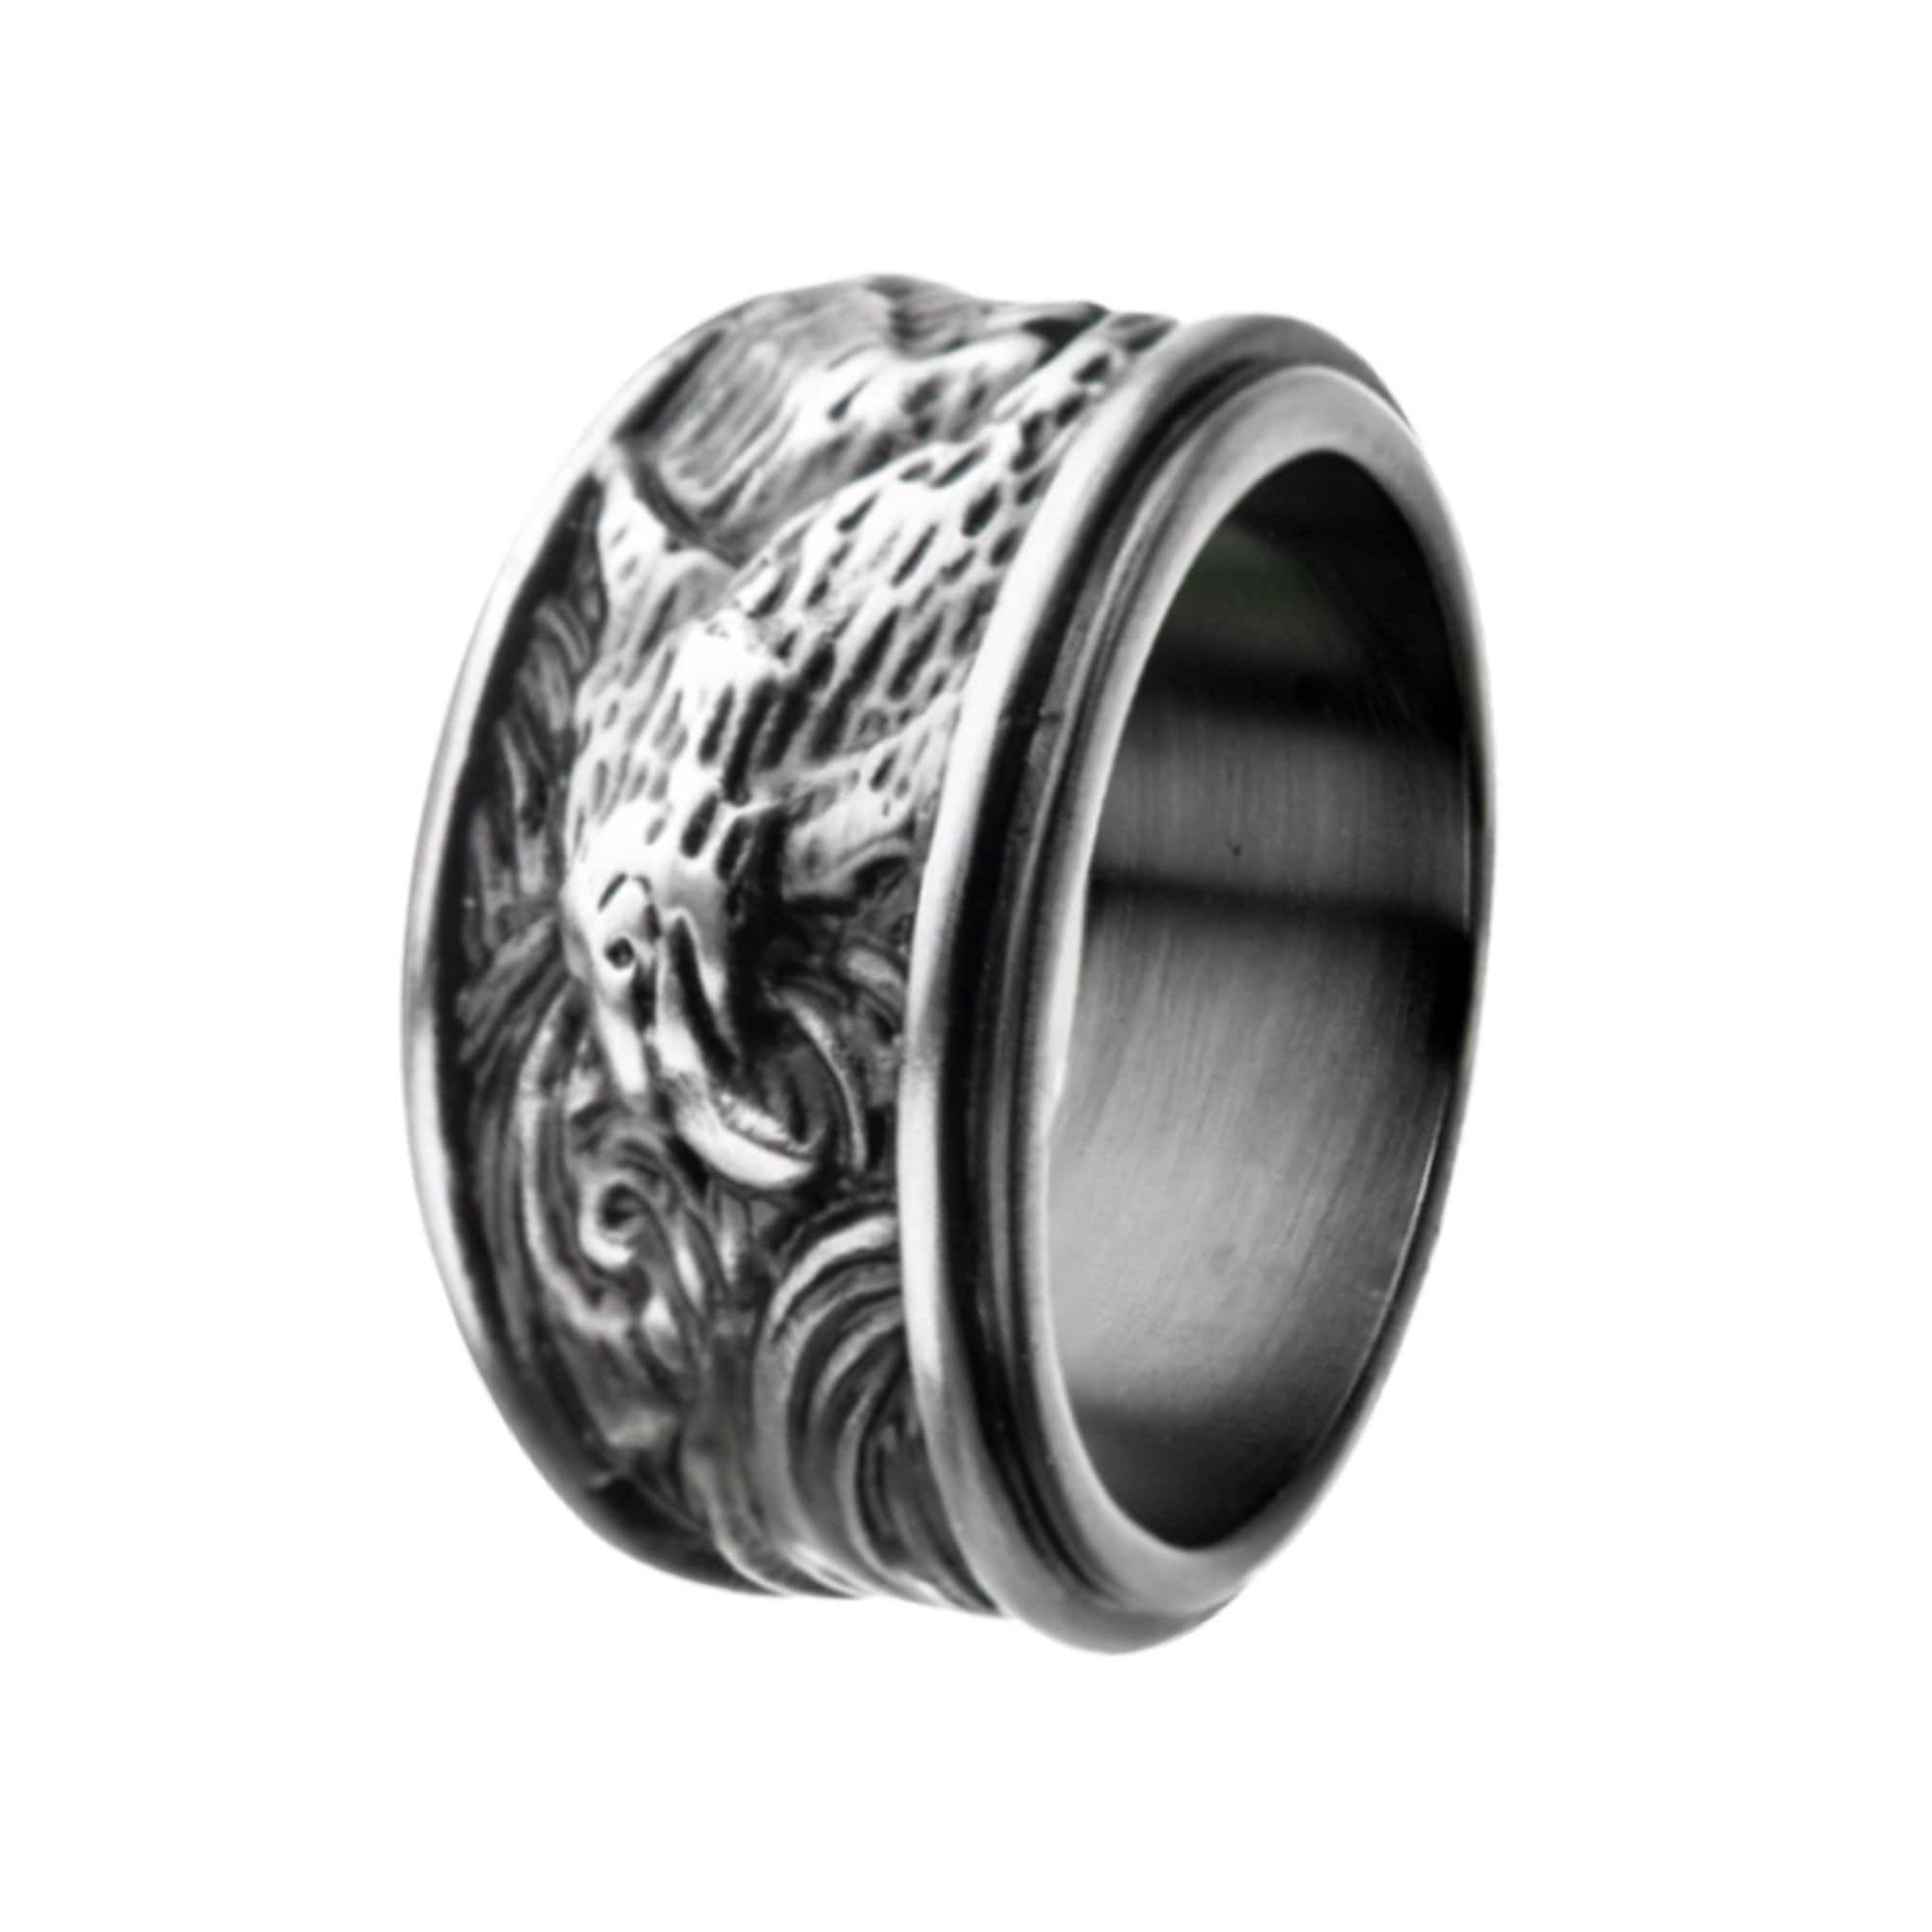 INOX JEWELRY Rings Silver Tone Stainless Steel Oxidized Finish Brushed Eagle Band Ring